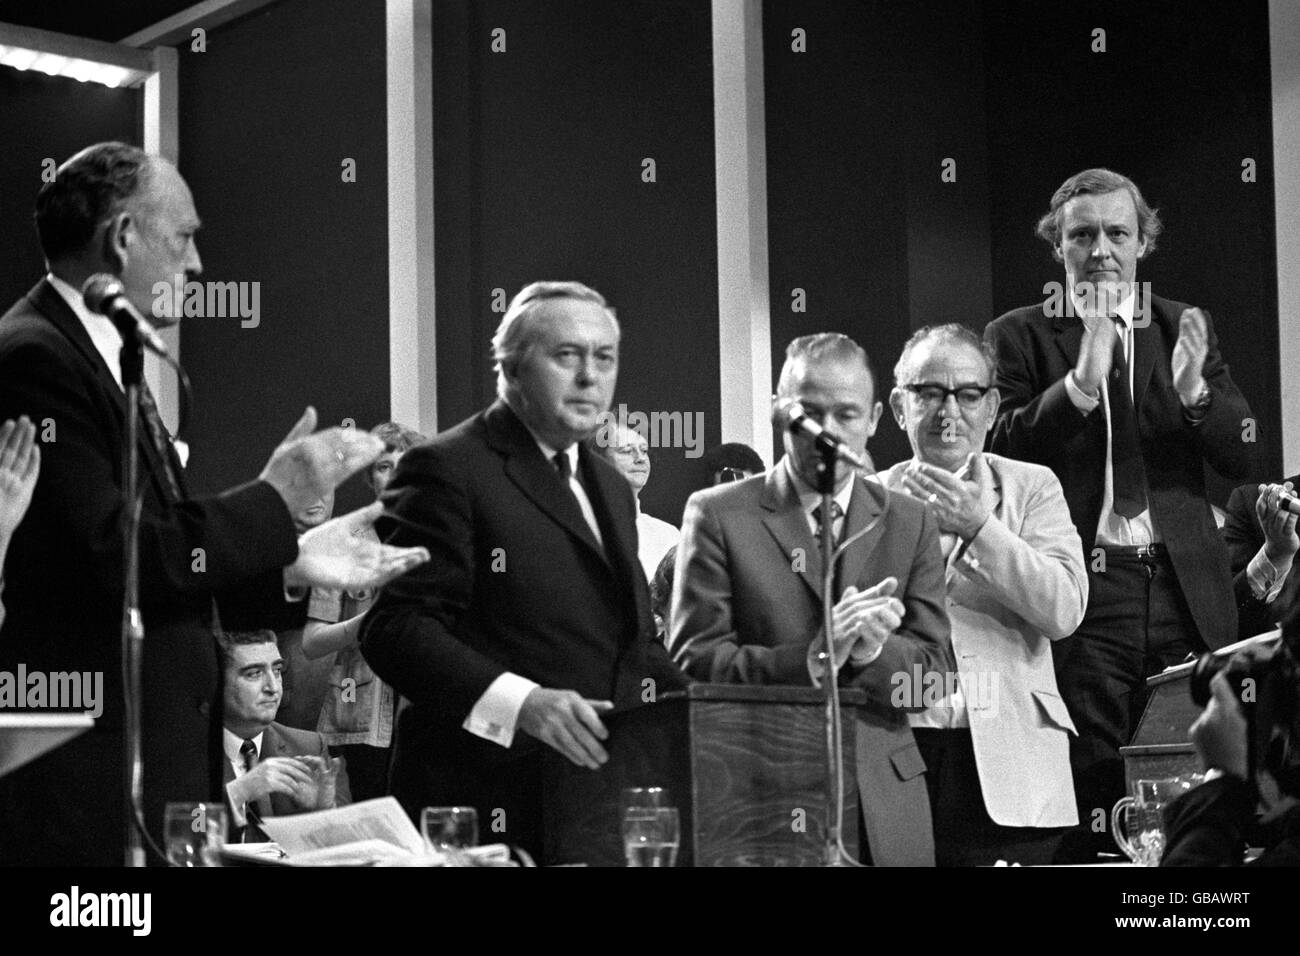 Standing ovation for Harold Wilson after his speech attacking the Prime Minister and giving his own policy to fight inflation. Left to right: Tom Driberg, Harold Wilson, Ron Hayward, Sir Harry Nicholas, and Tony Benn. Stock Photo